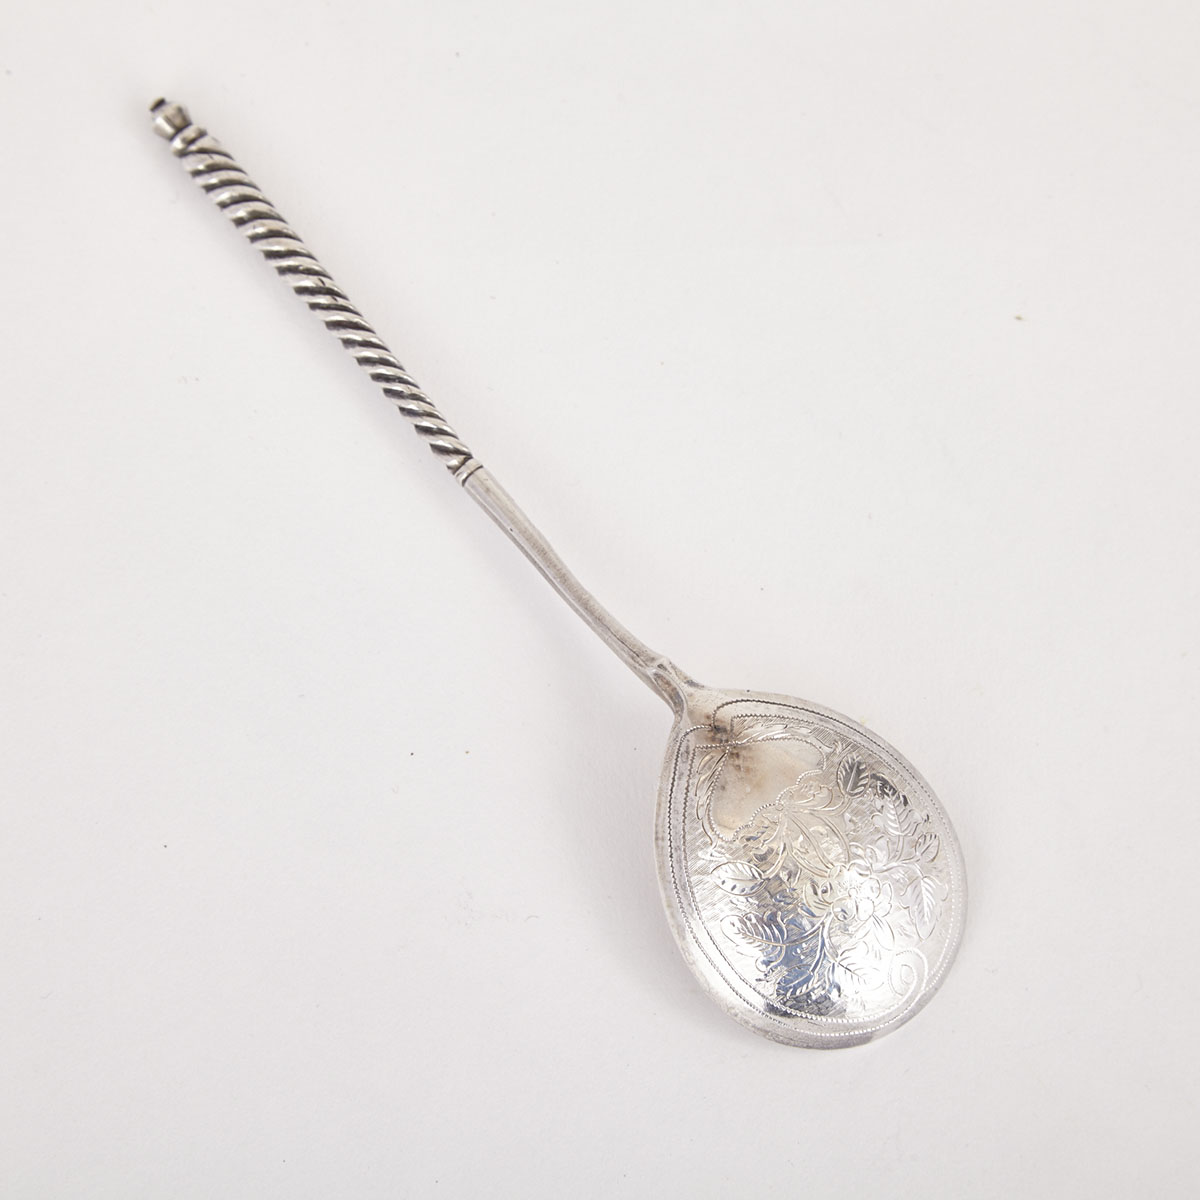 Russian Silver Spoon, Stepan Levin, Moscow, 1875